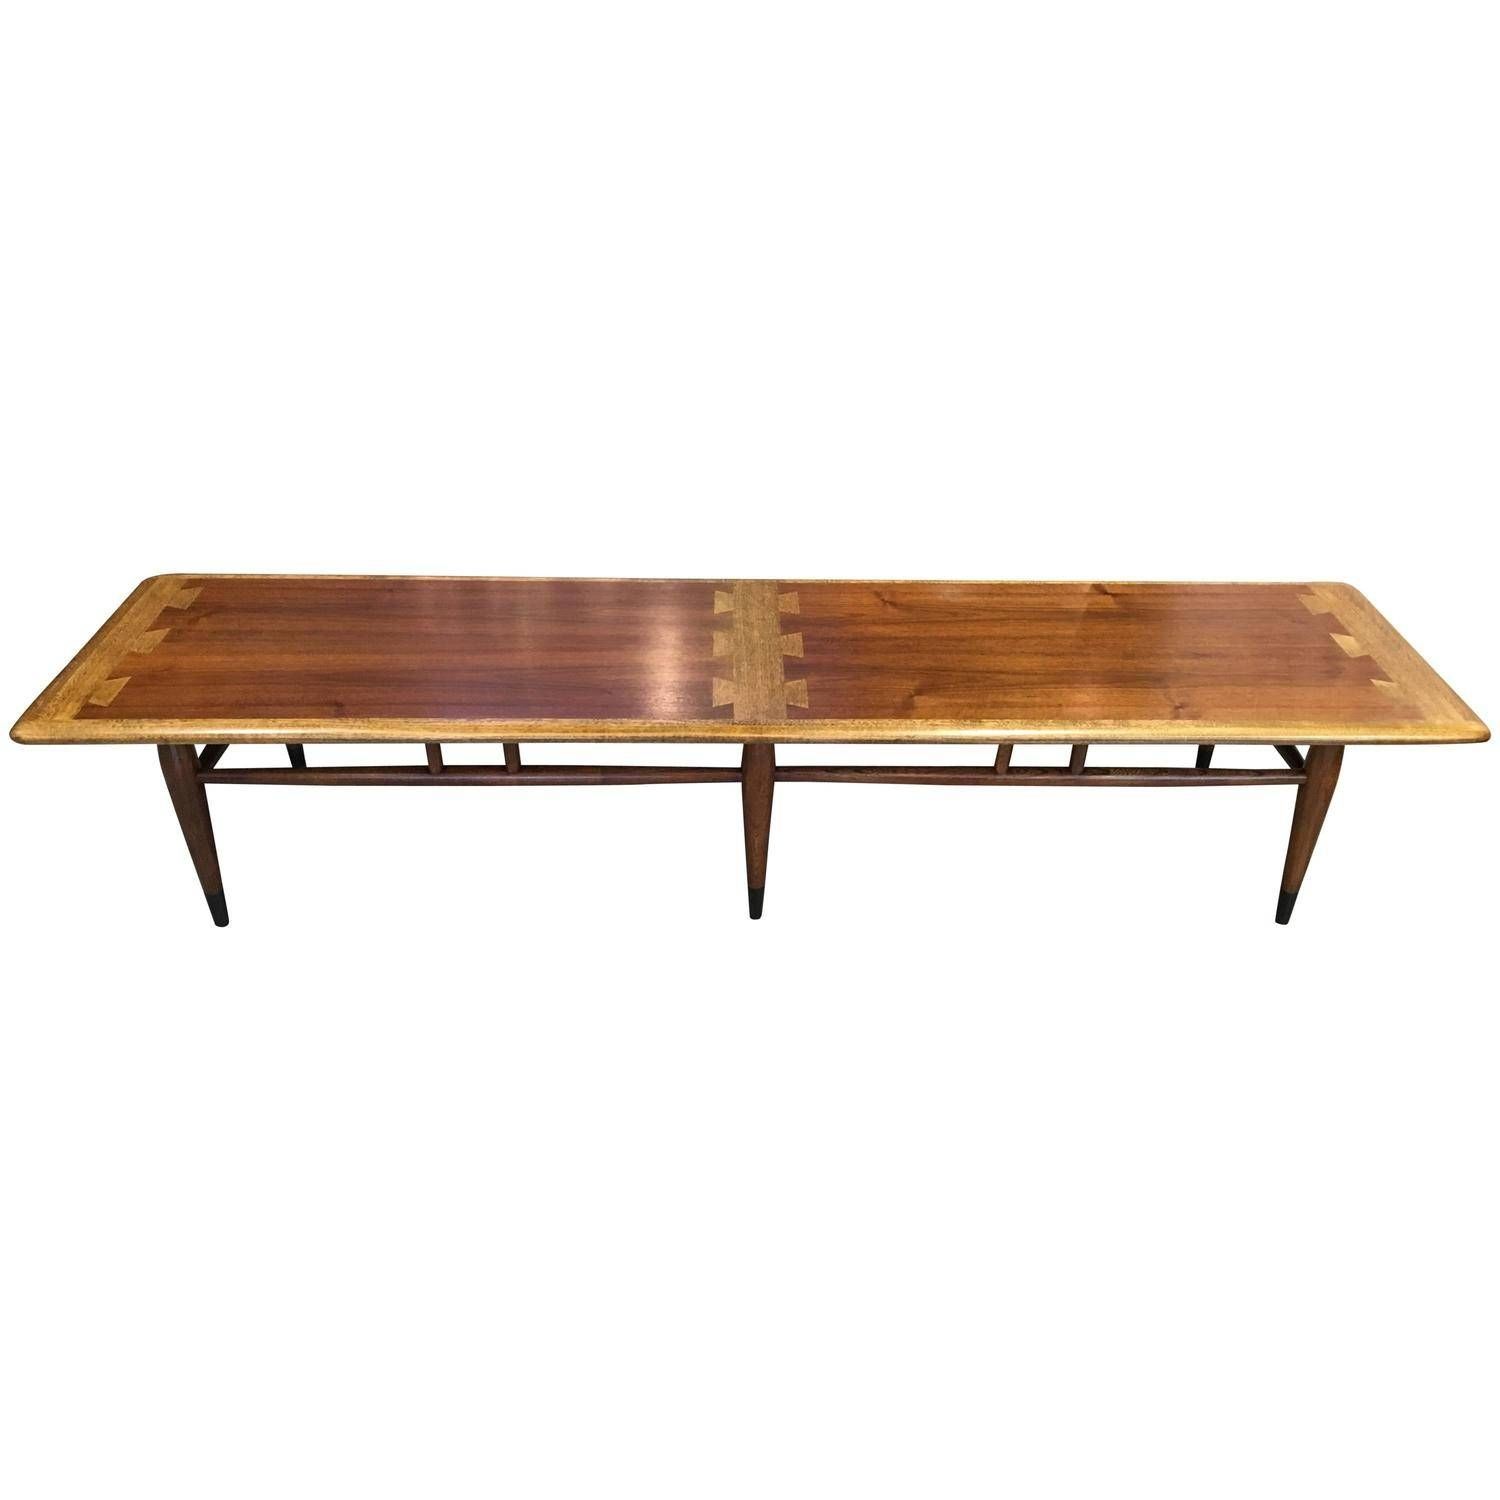 Extra Long Lane Dovetail Coffee Table For Sale At 1stdibs Inside Extra Long Coffee Tables (View 12 of 15)